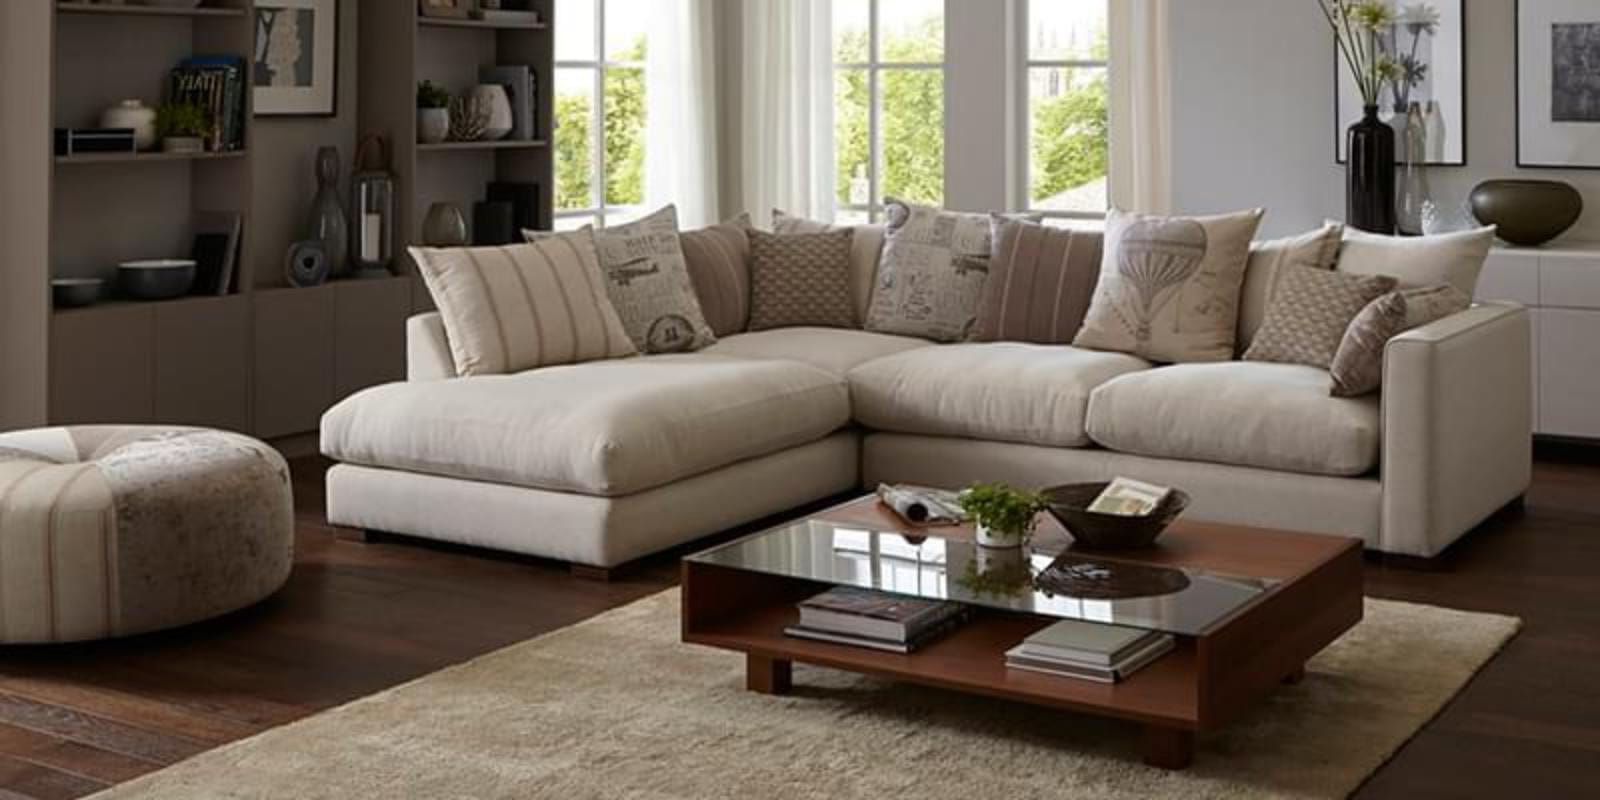 20+ L Shaped Sofa Beige With Regard To Small L Shaped Sectional Sofas In Beige (Gallery 18 of 20)